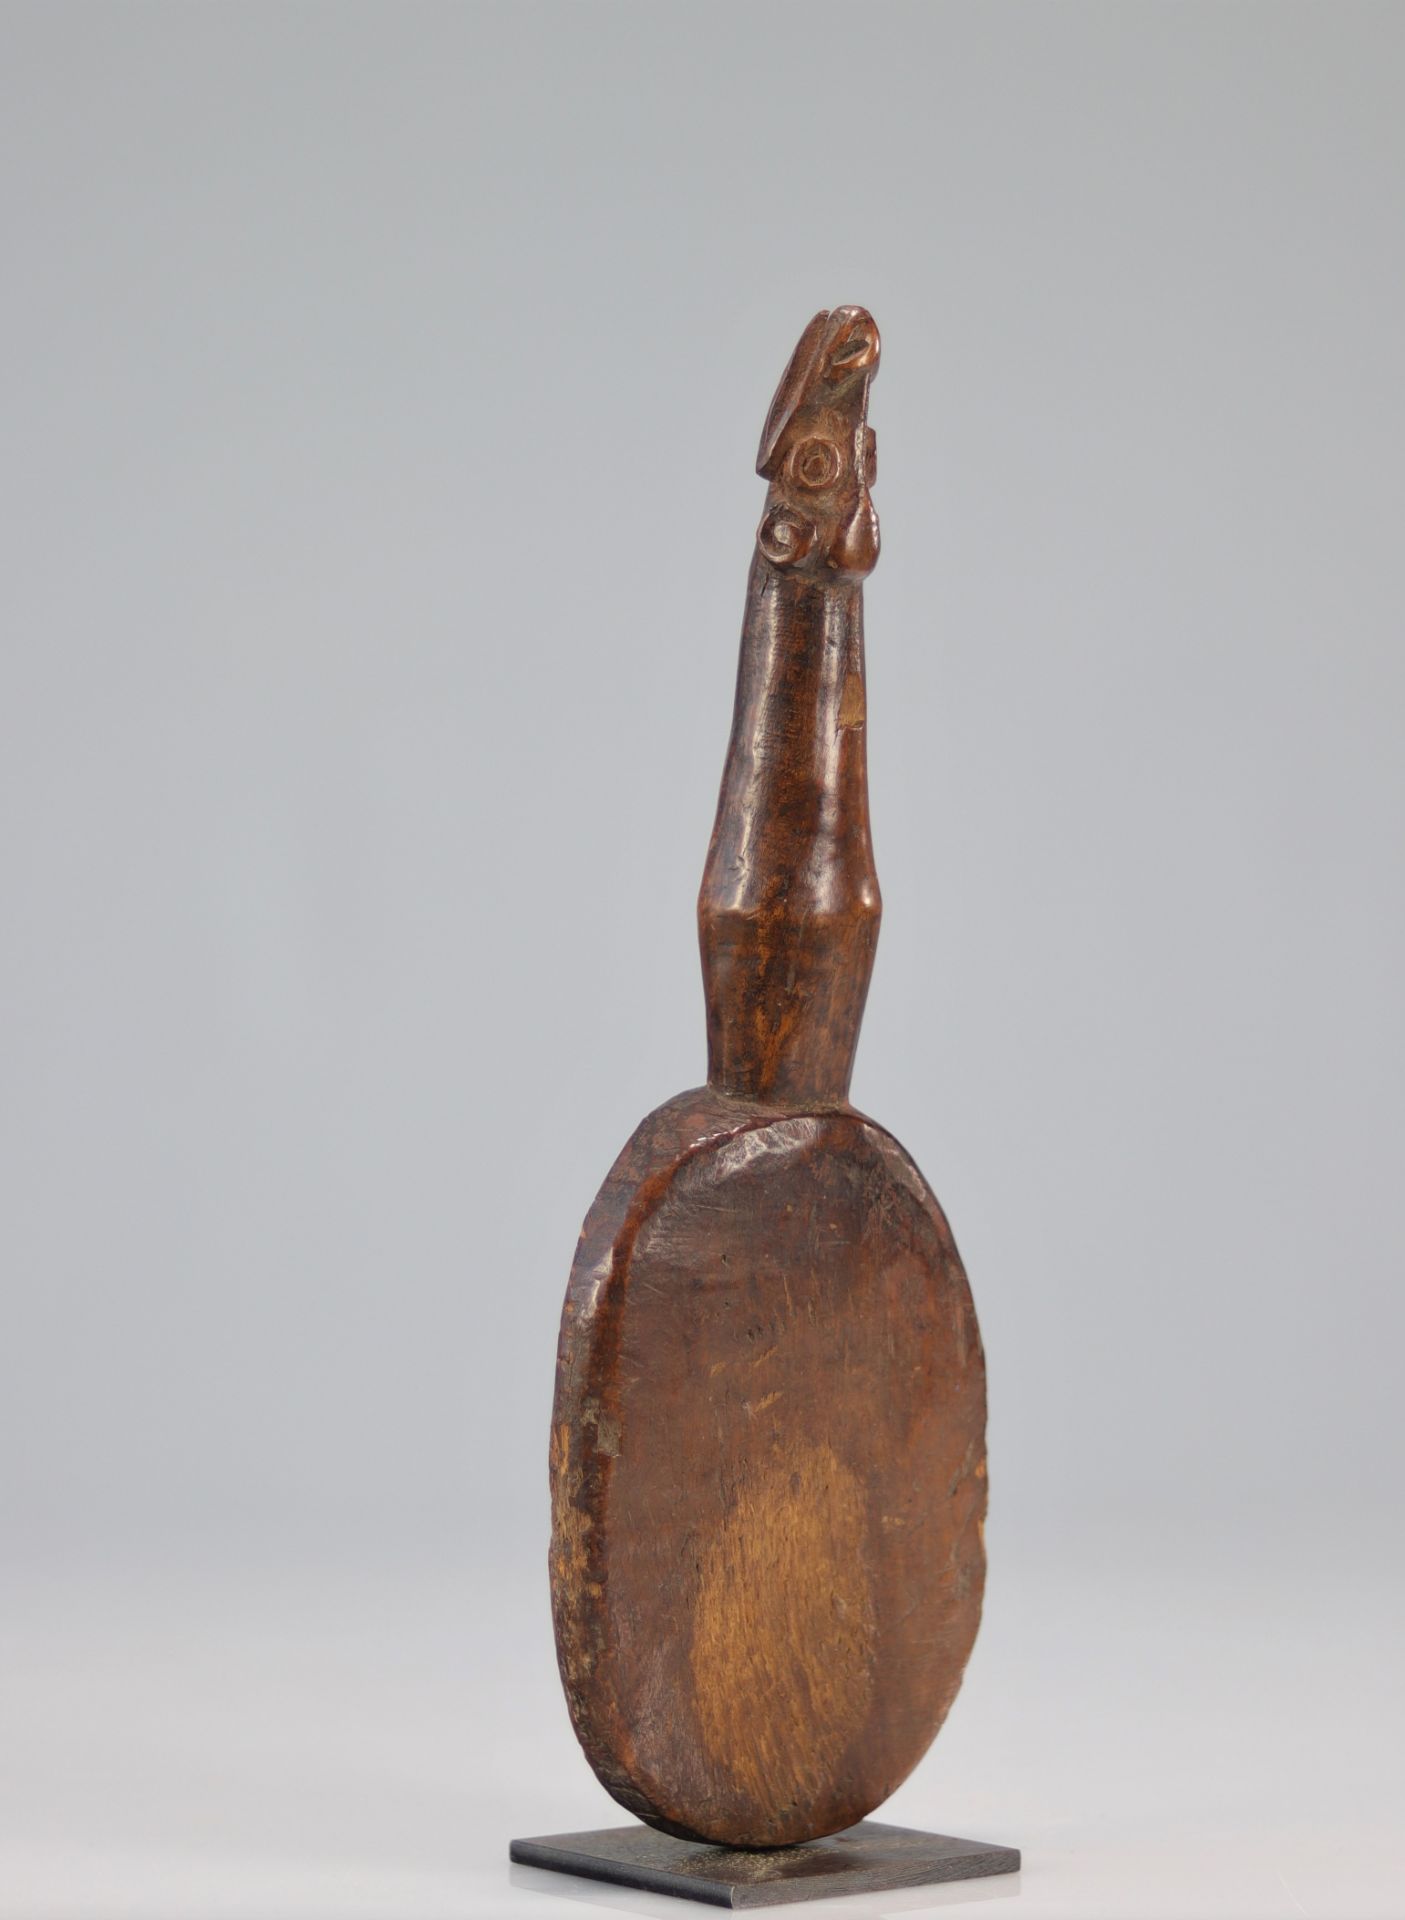 Oceania object carved with a head - Image 2 of 3